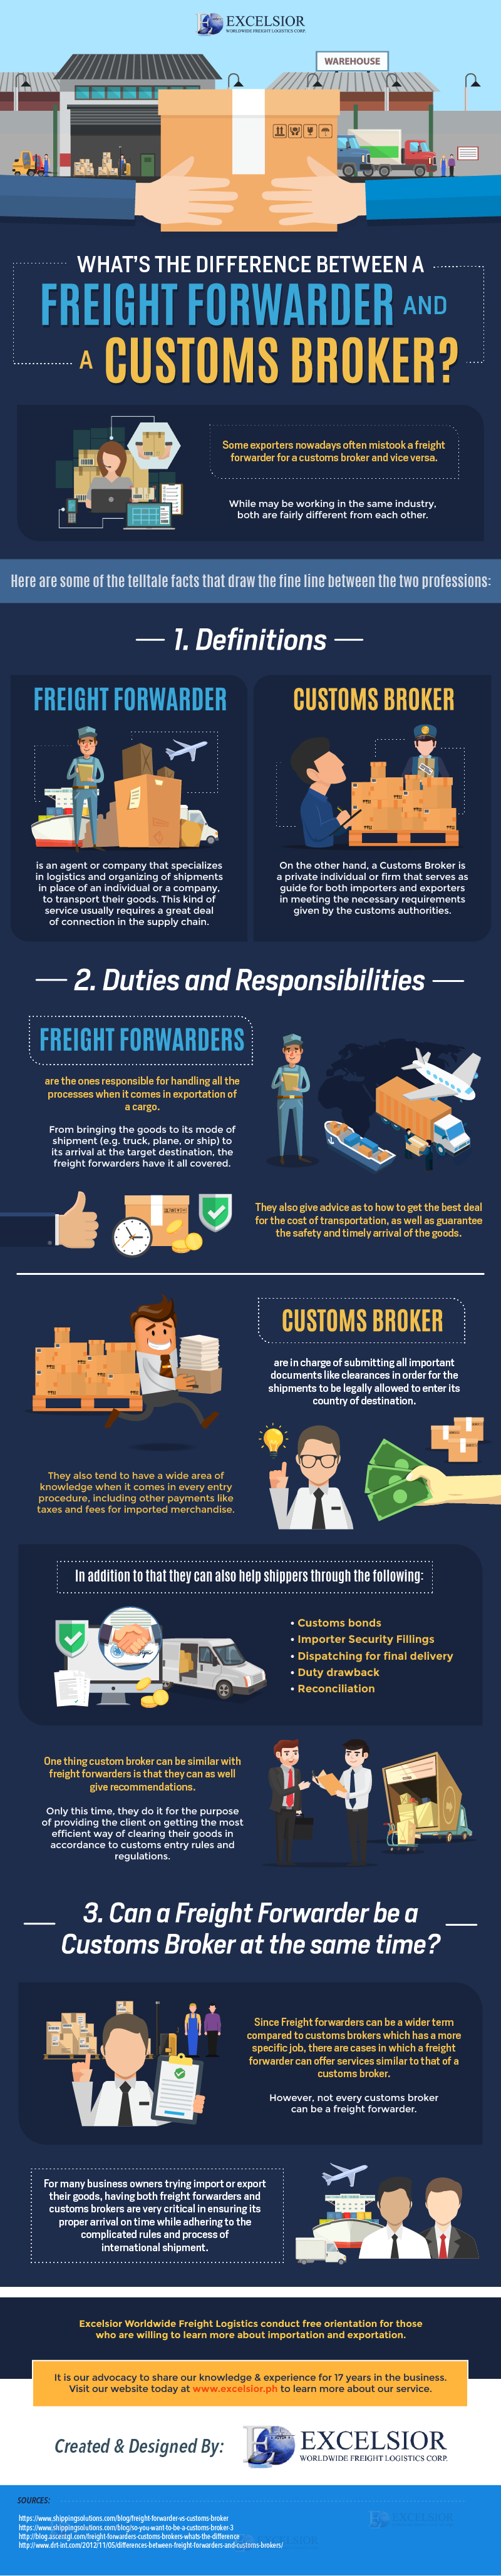 Difference Between a Freight Forwarder and a Customs Broker - Infographic